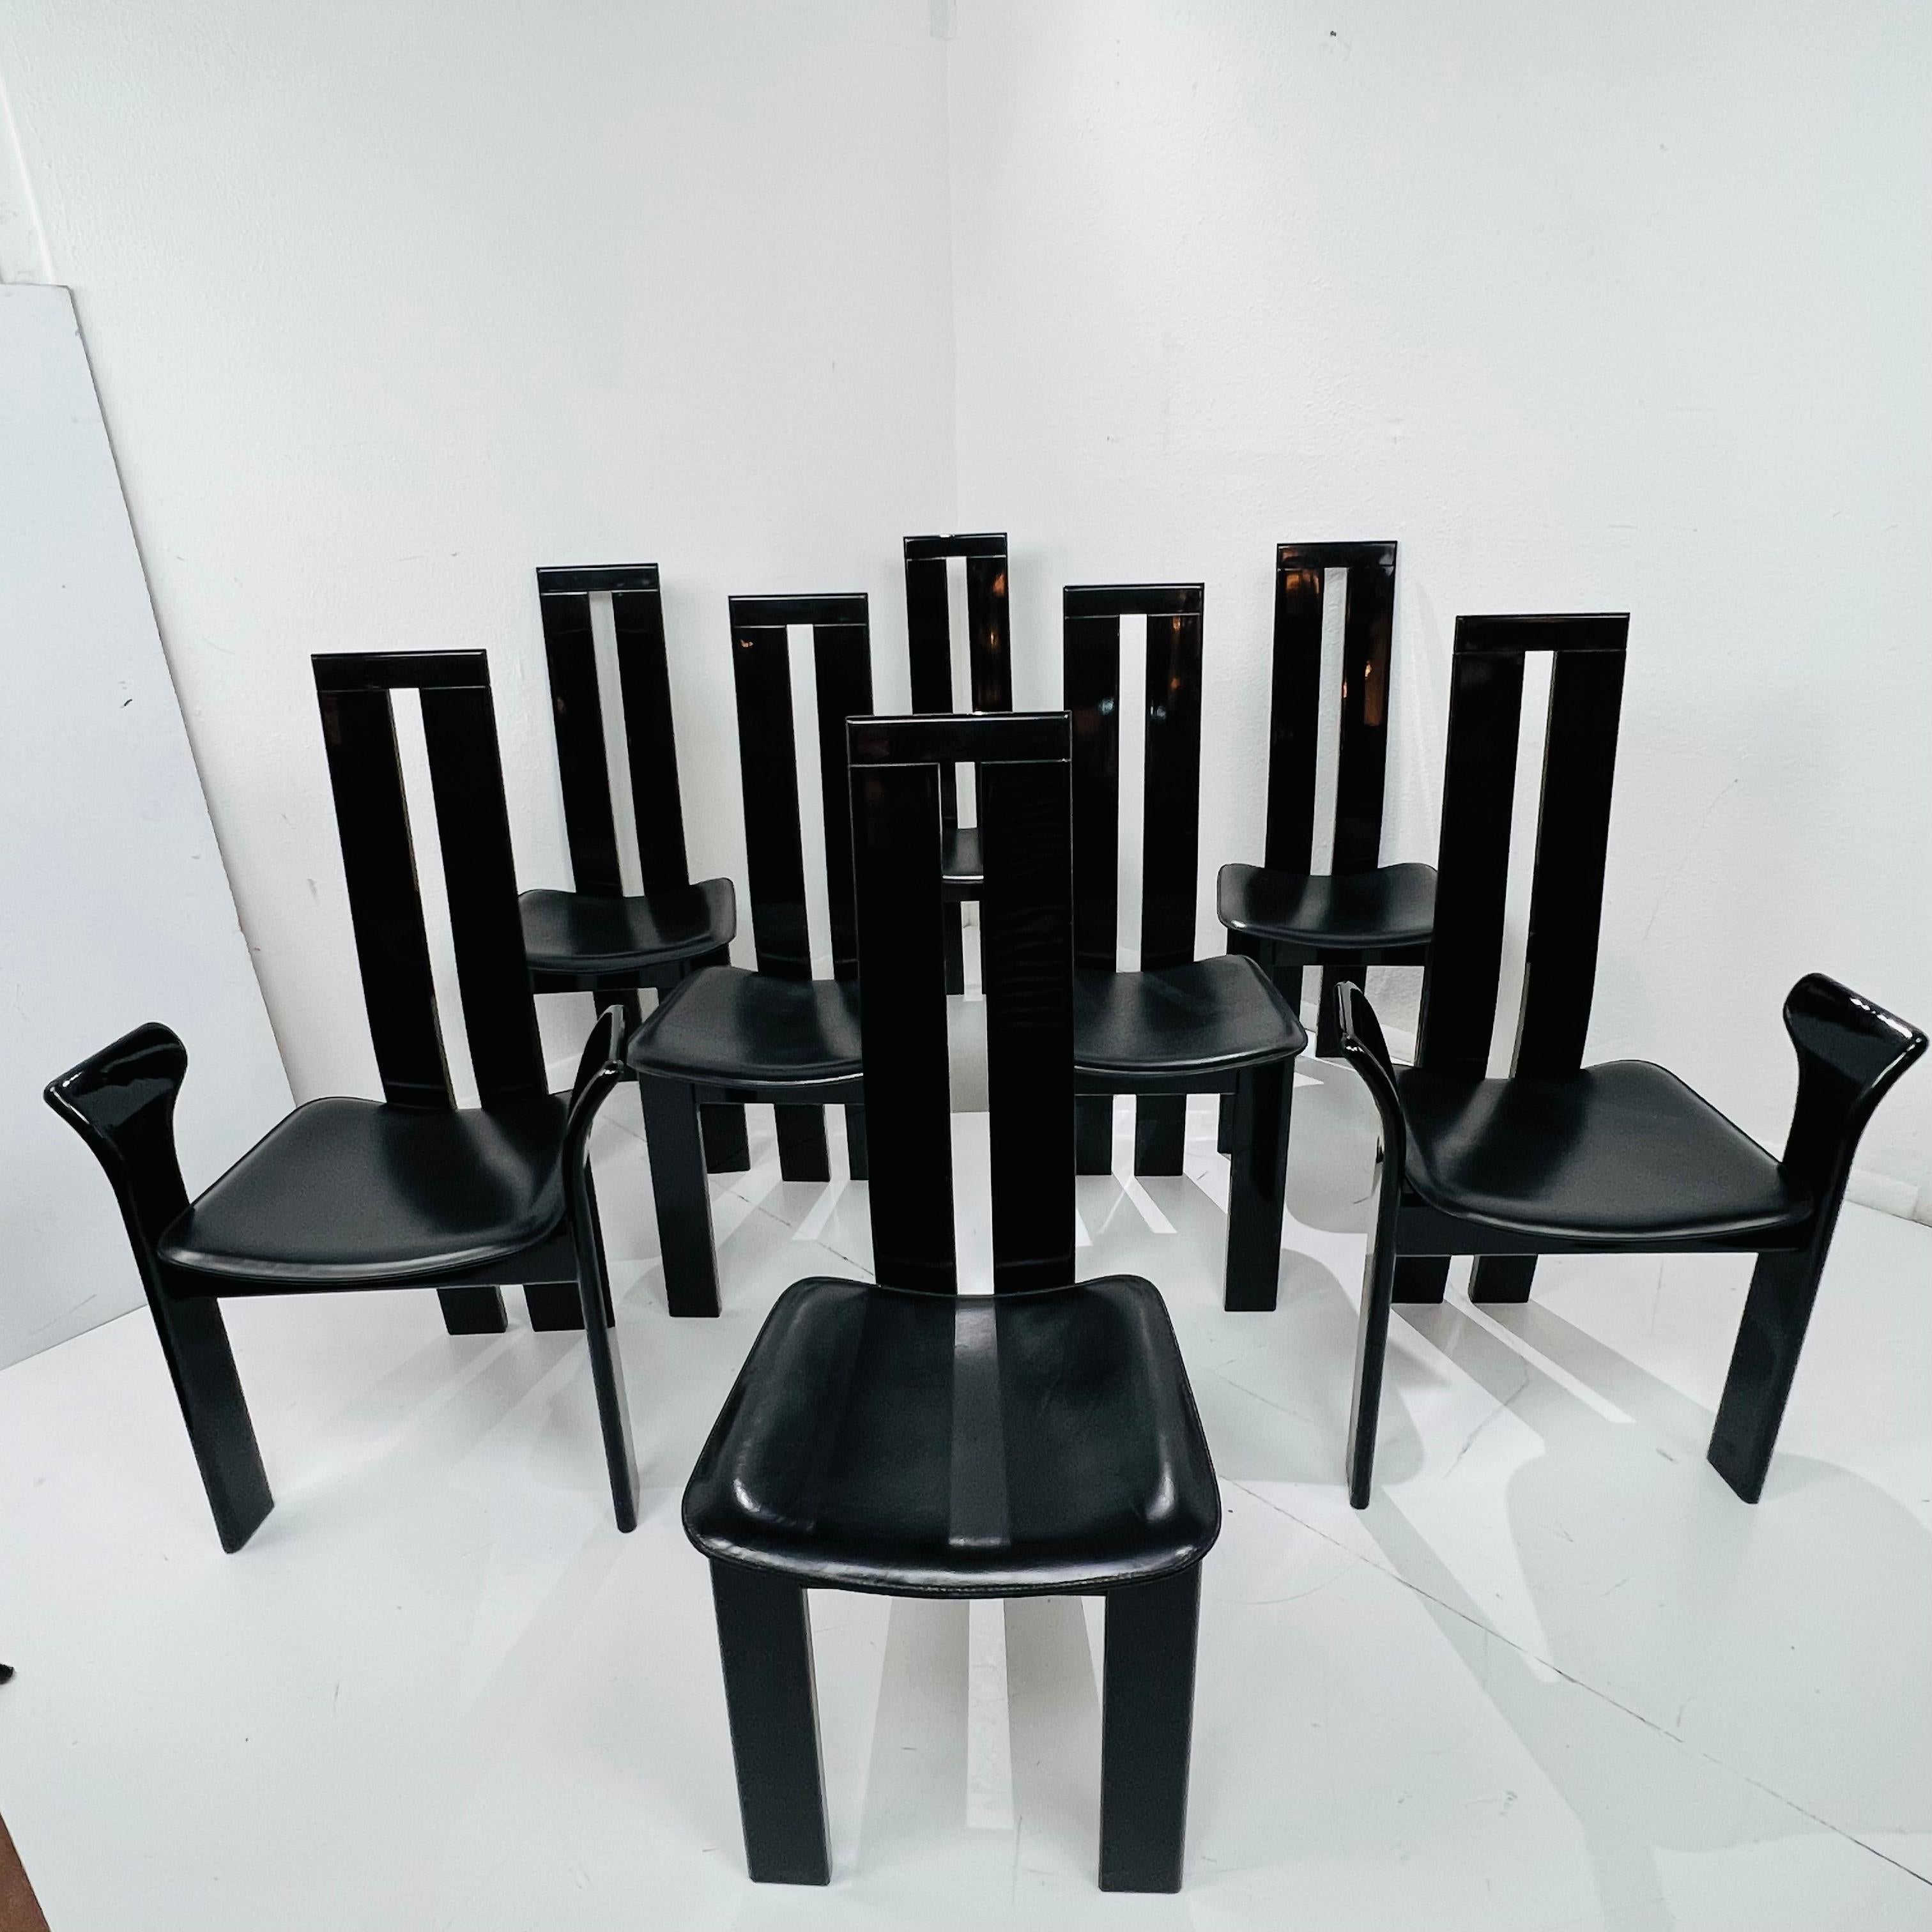 Chic set of post modern dining chairs designed by Pietro Costantini in San Vito al Torre Italy. The iconic chairs feature sculptural style piano black lacquered frames with conforming black leather seat pads. The set consists of six side chairs and